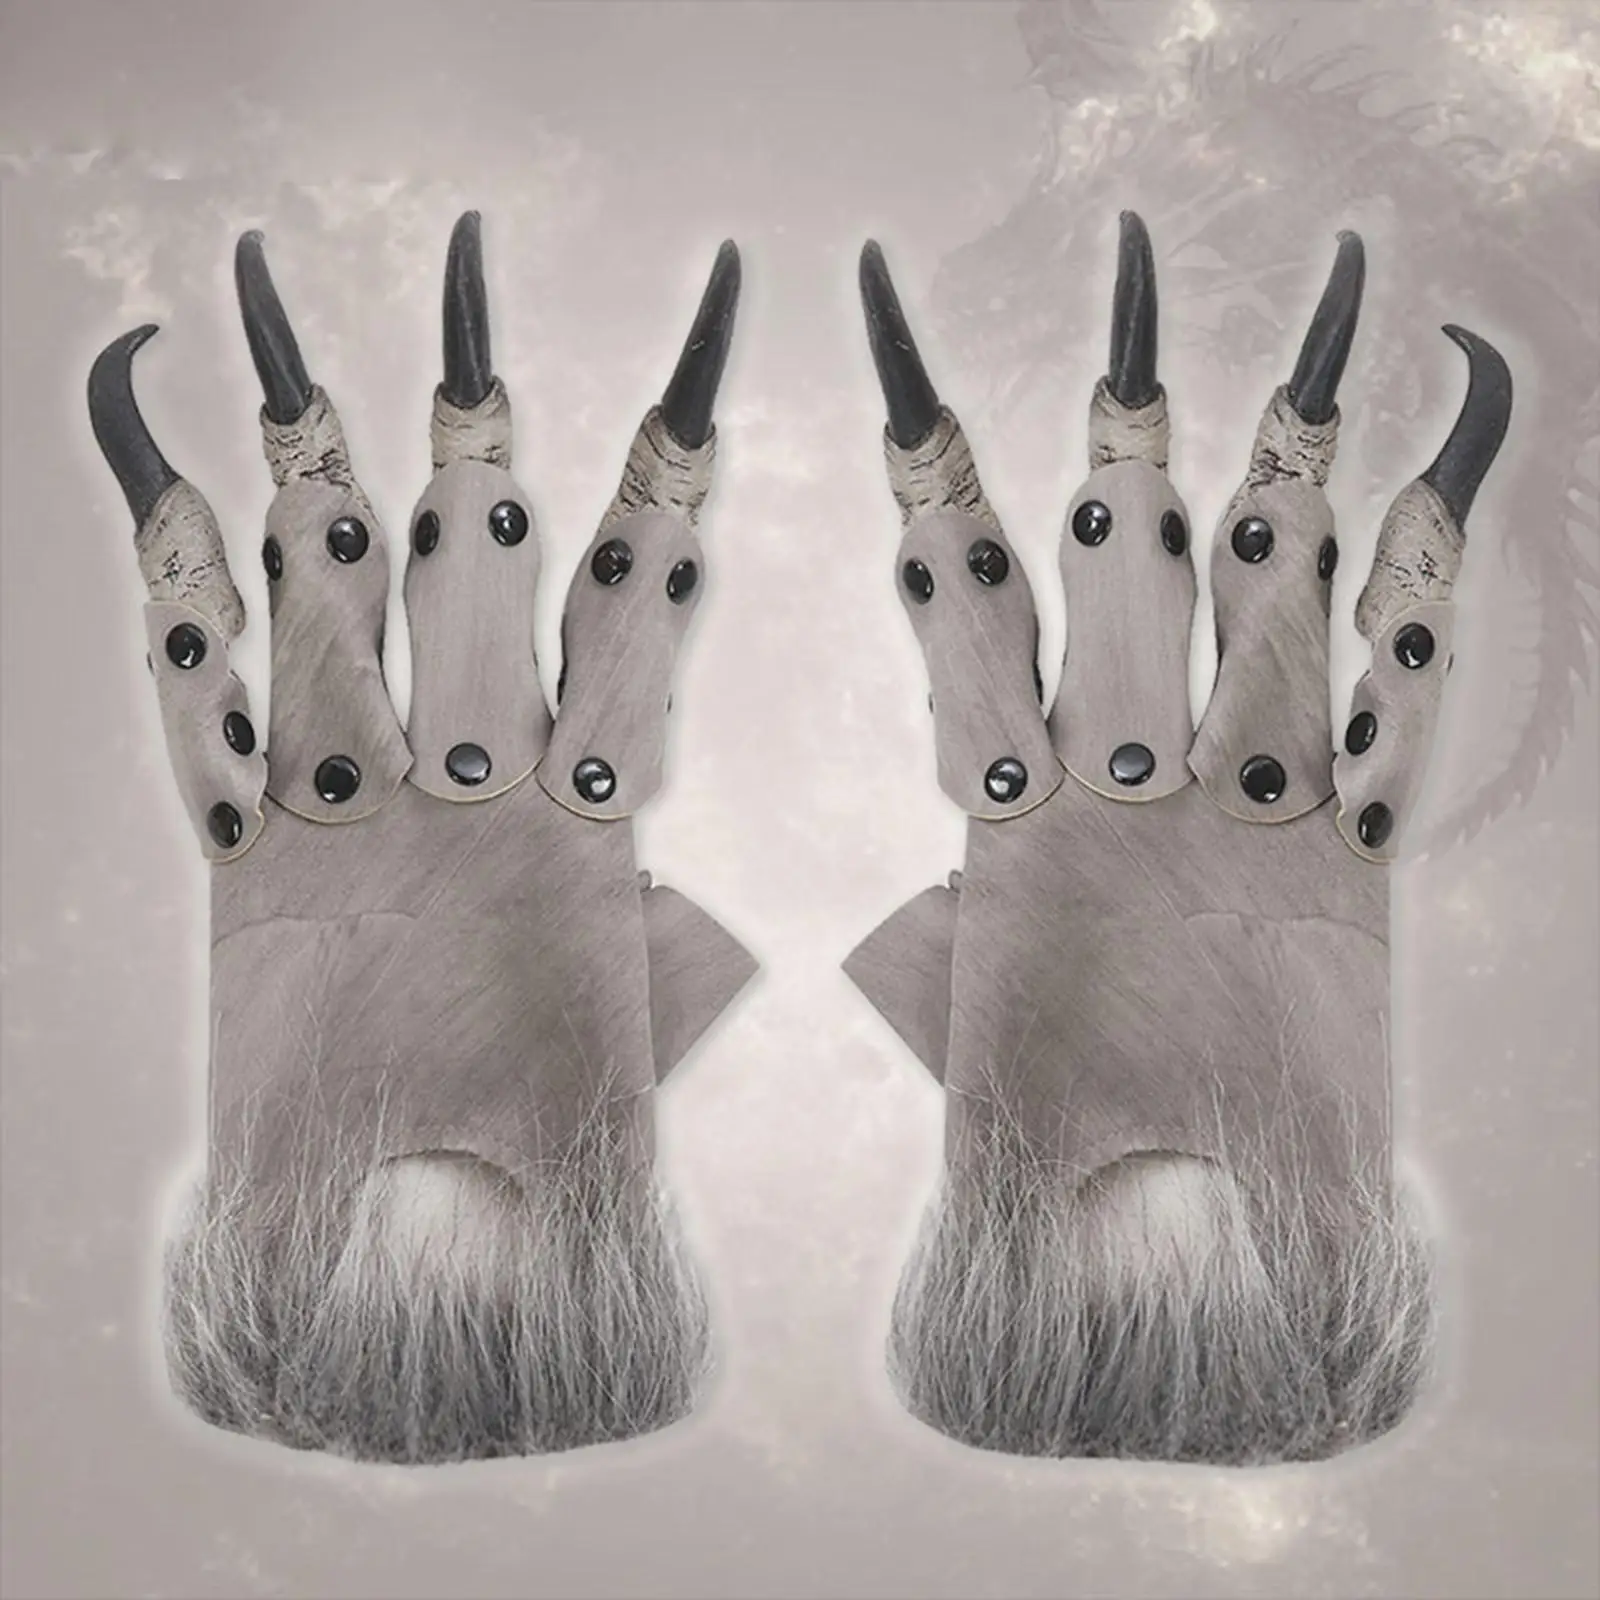 Hairy Halloween Dragon Glove Costume Claw Dress up Mitts Gift Monster Hands Paws for Carnival Fancy Dress Easter Party Props